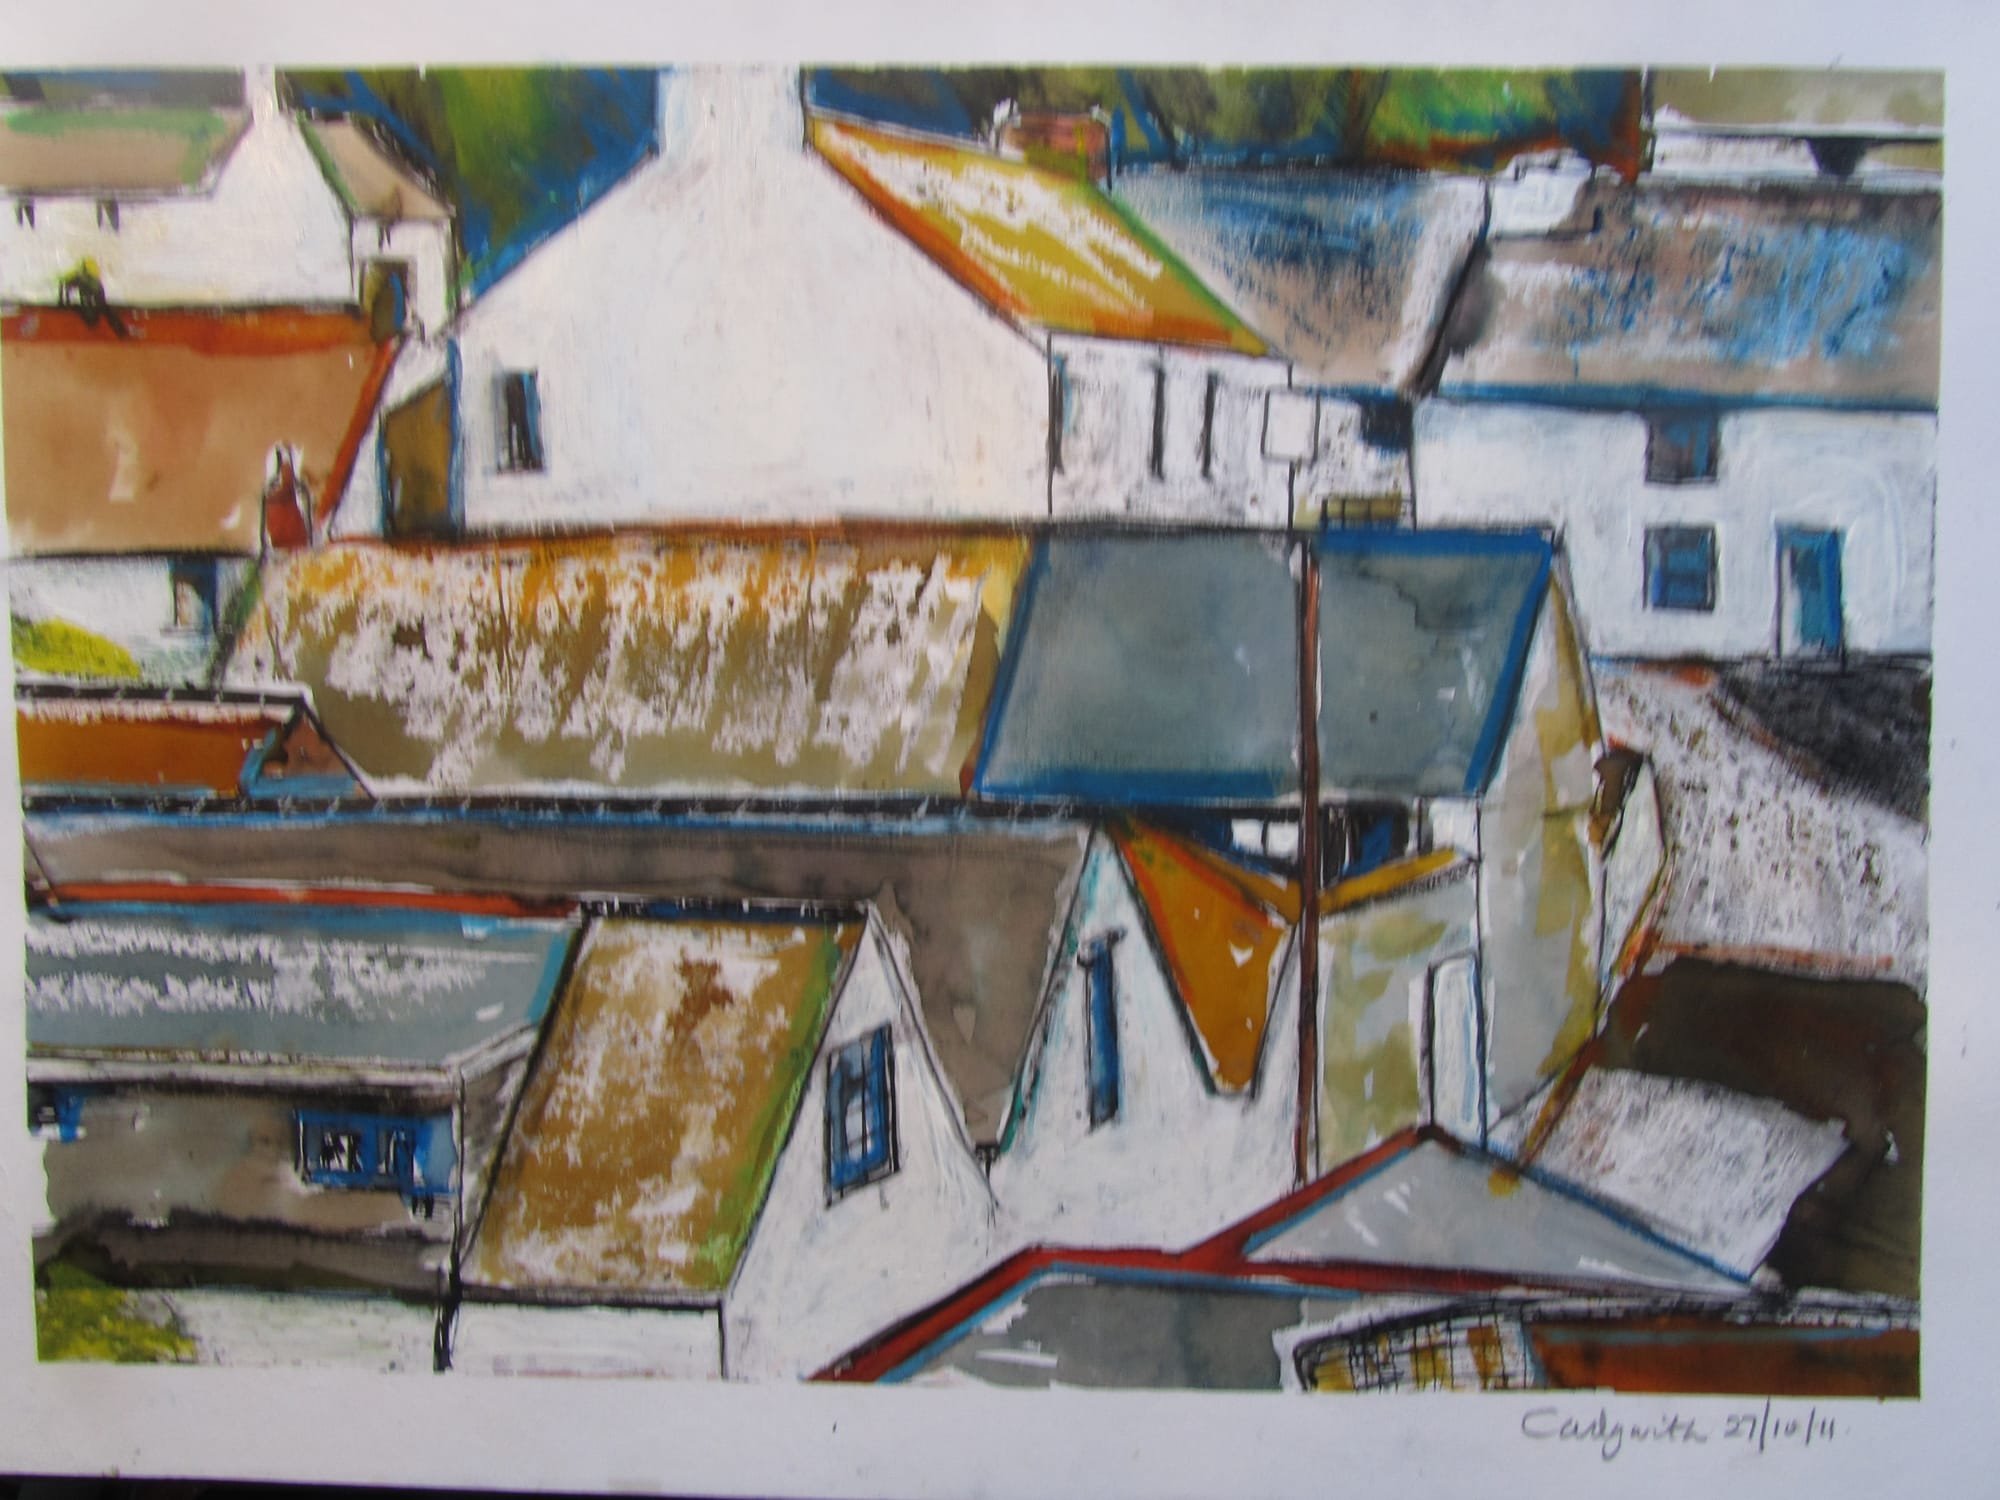 Cadgwith Sketch